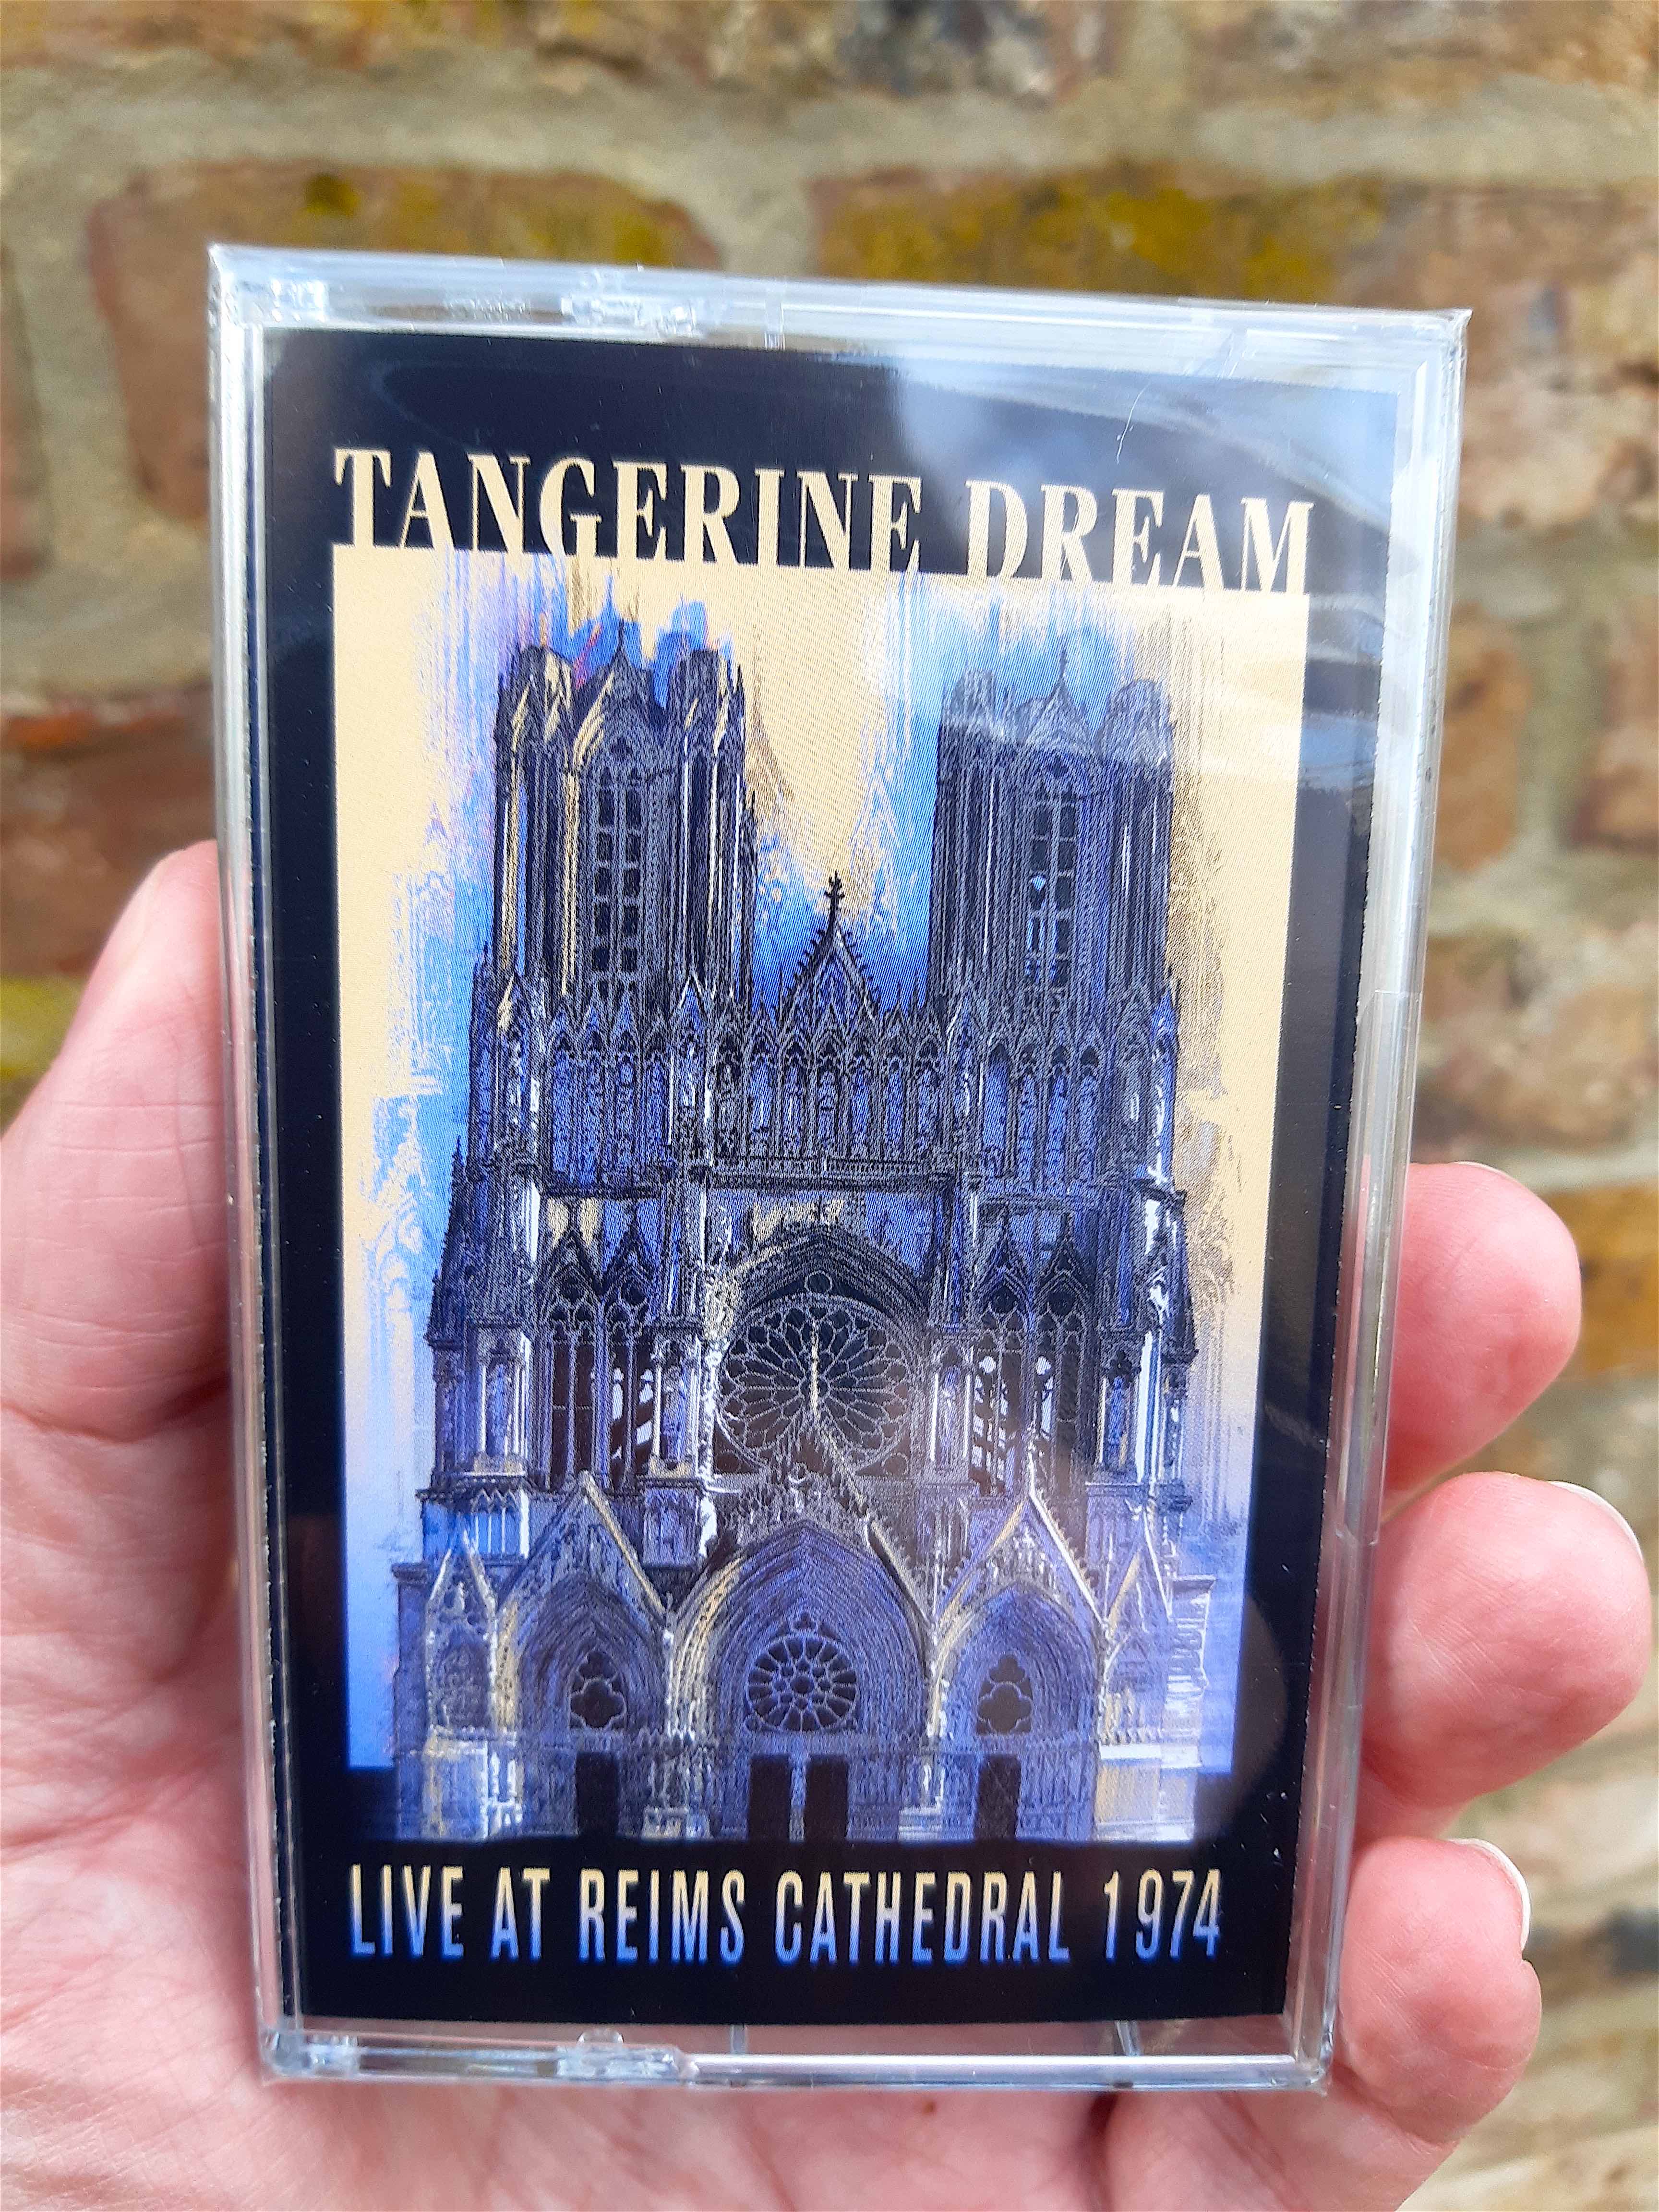 Tangerine Dream Live at Reims Cathedral 1974 cassette.jpg